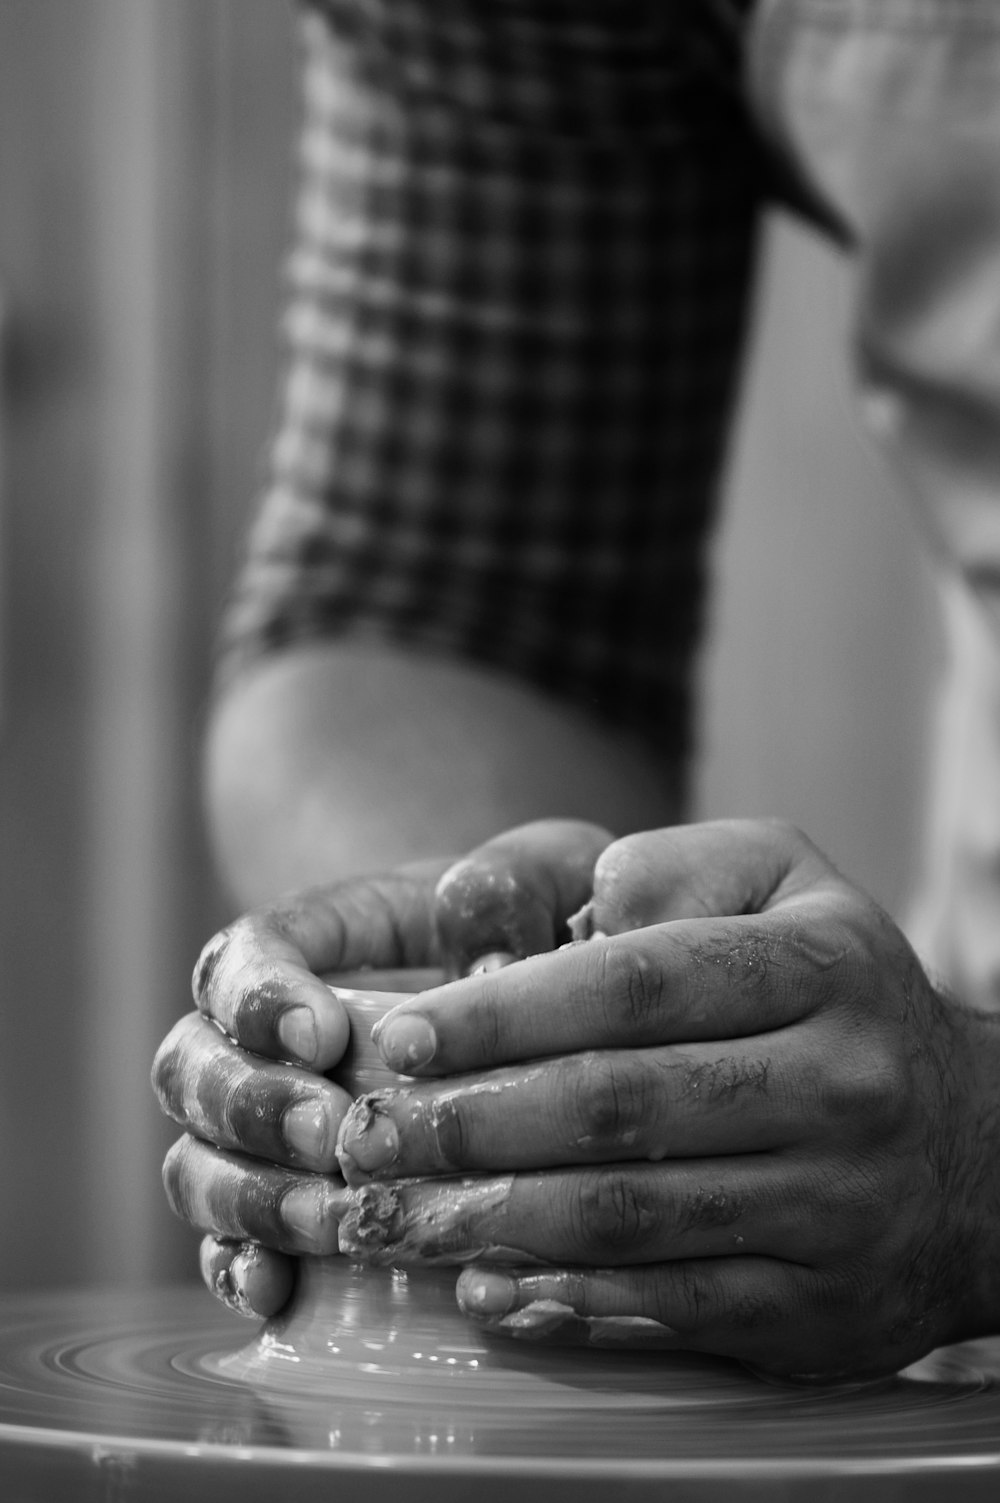 a black and white photo of a person's hands on a plate